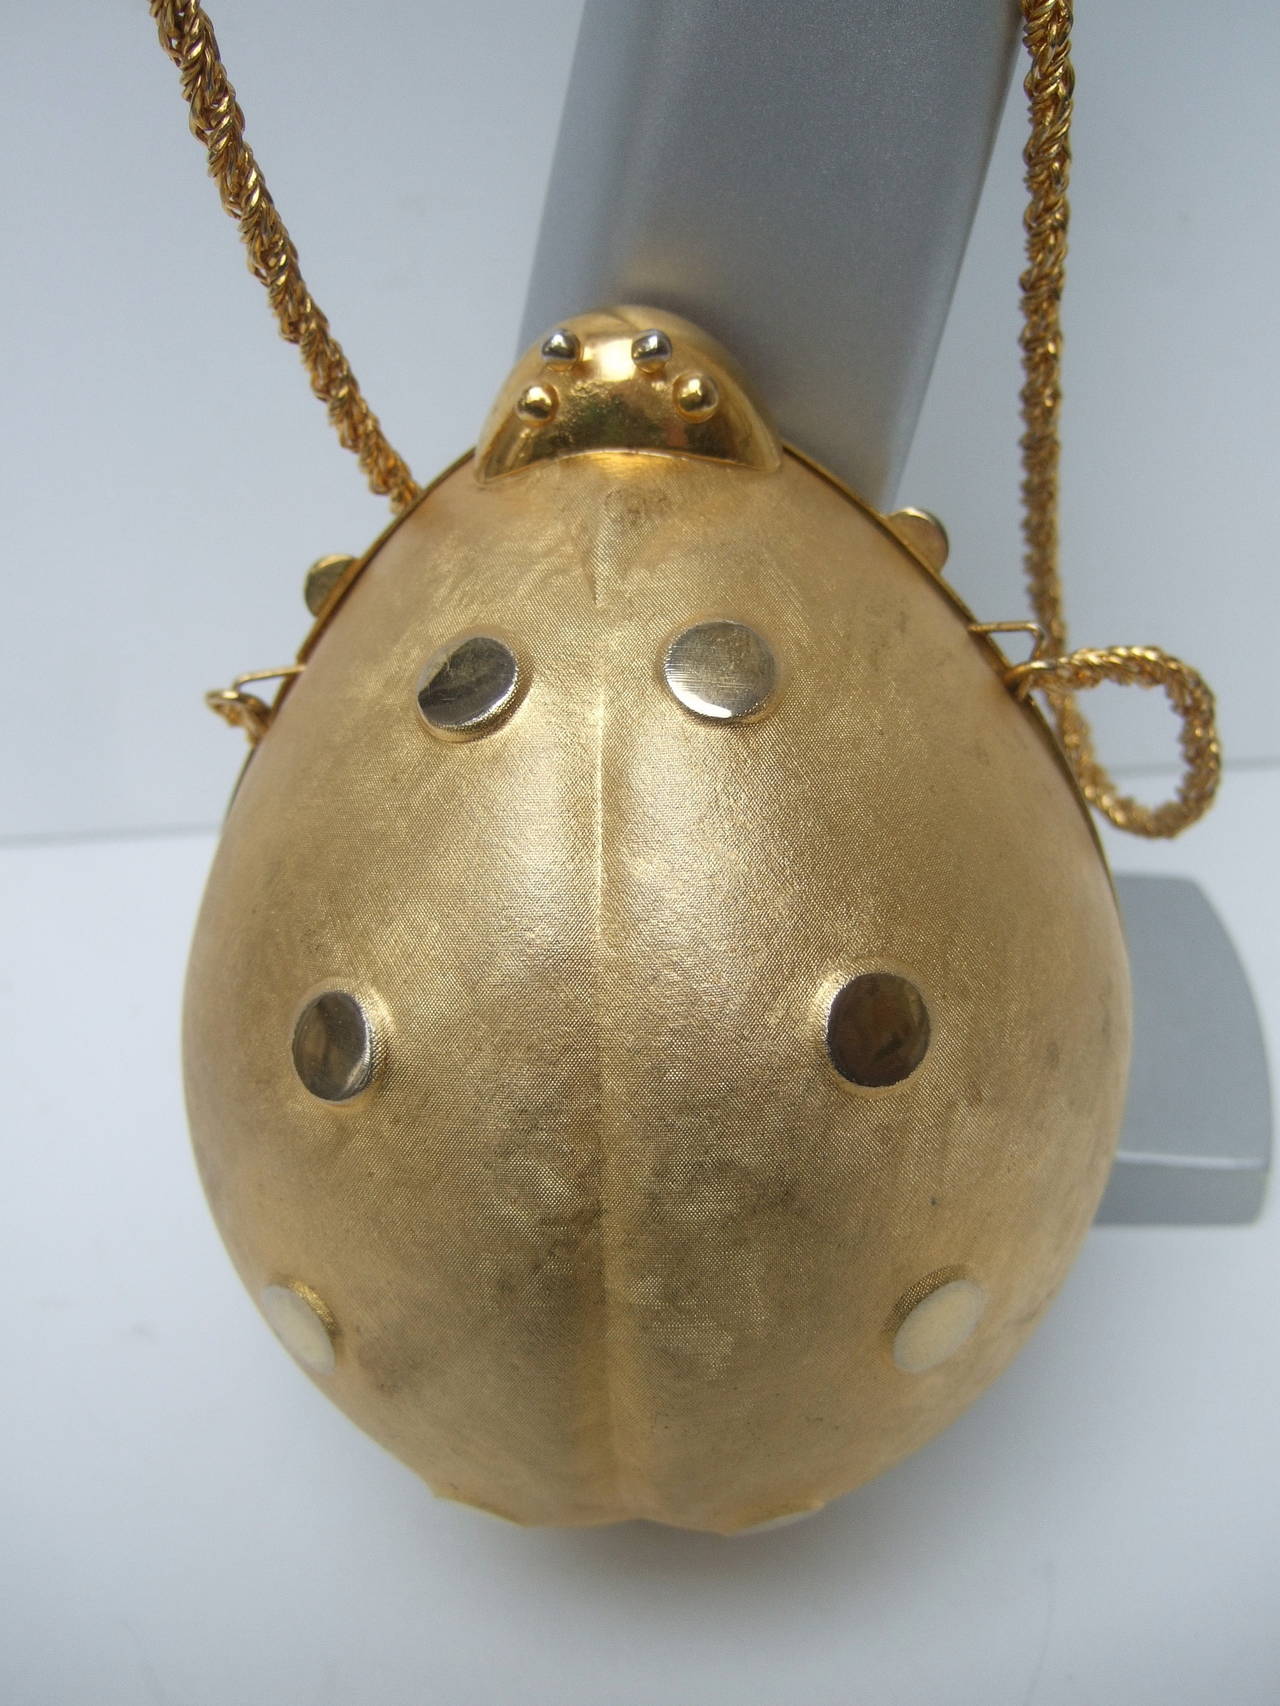 Brown Opulent Gilt Metal Lady Bug Evening Bag Made in Italy c 1970